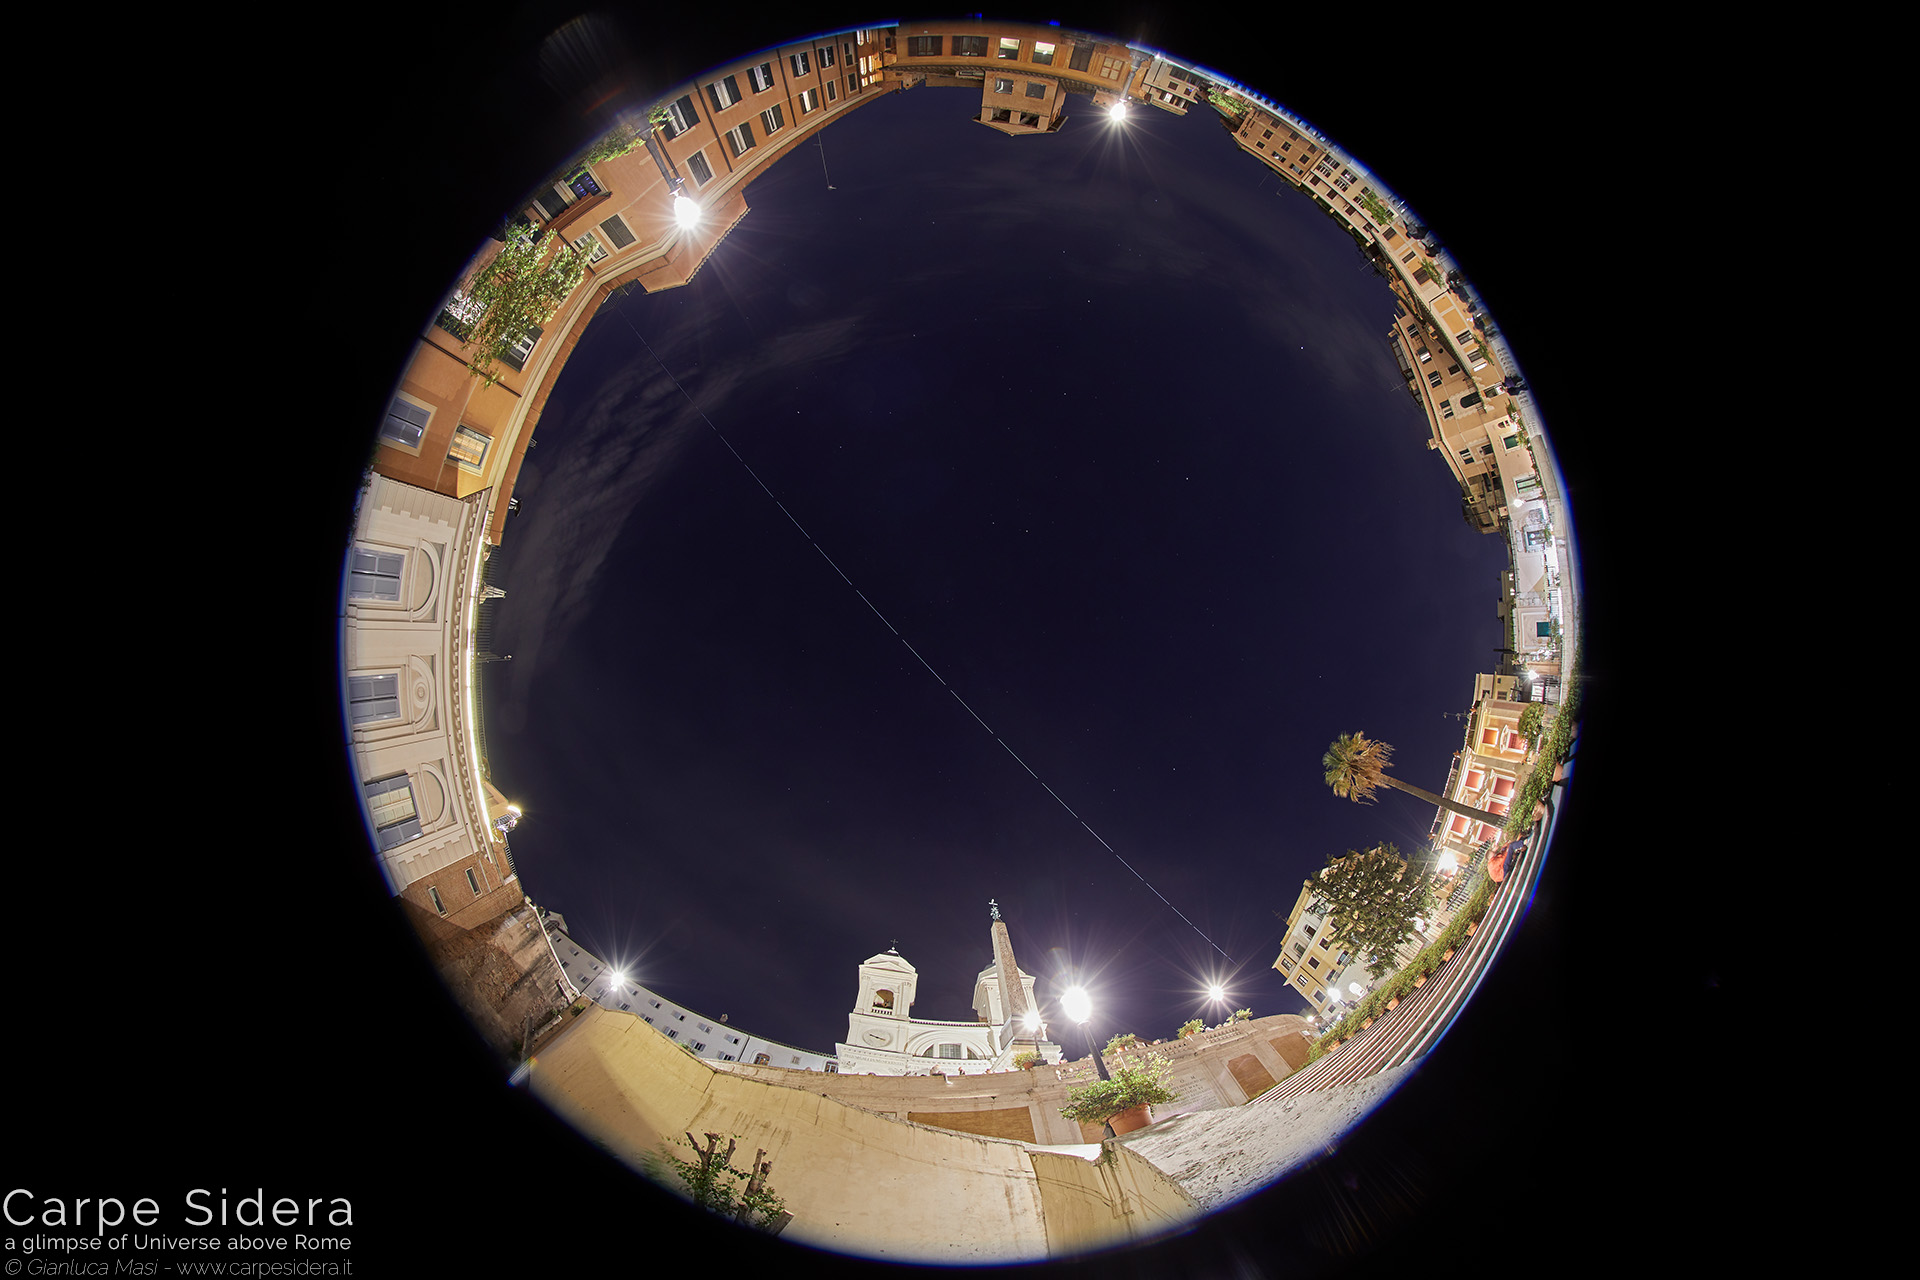 19. The International Space Station (ISS) flies above the Spanish Steps.